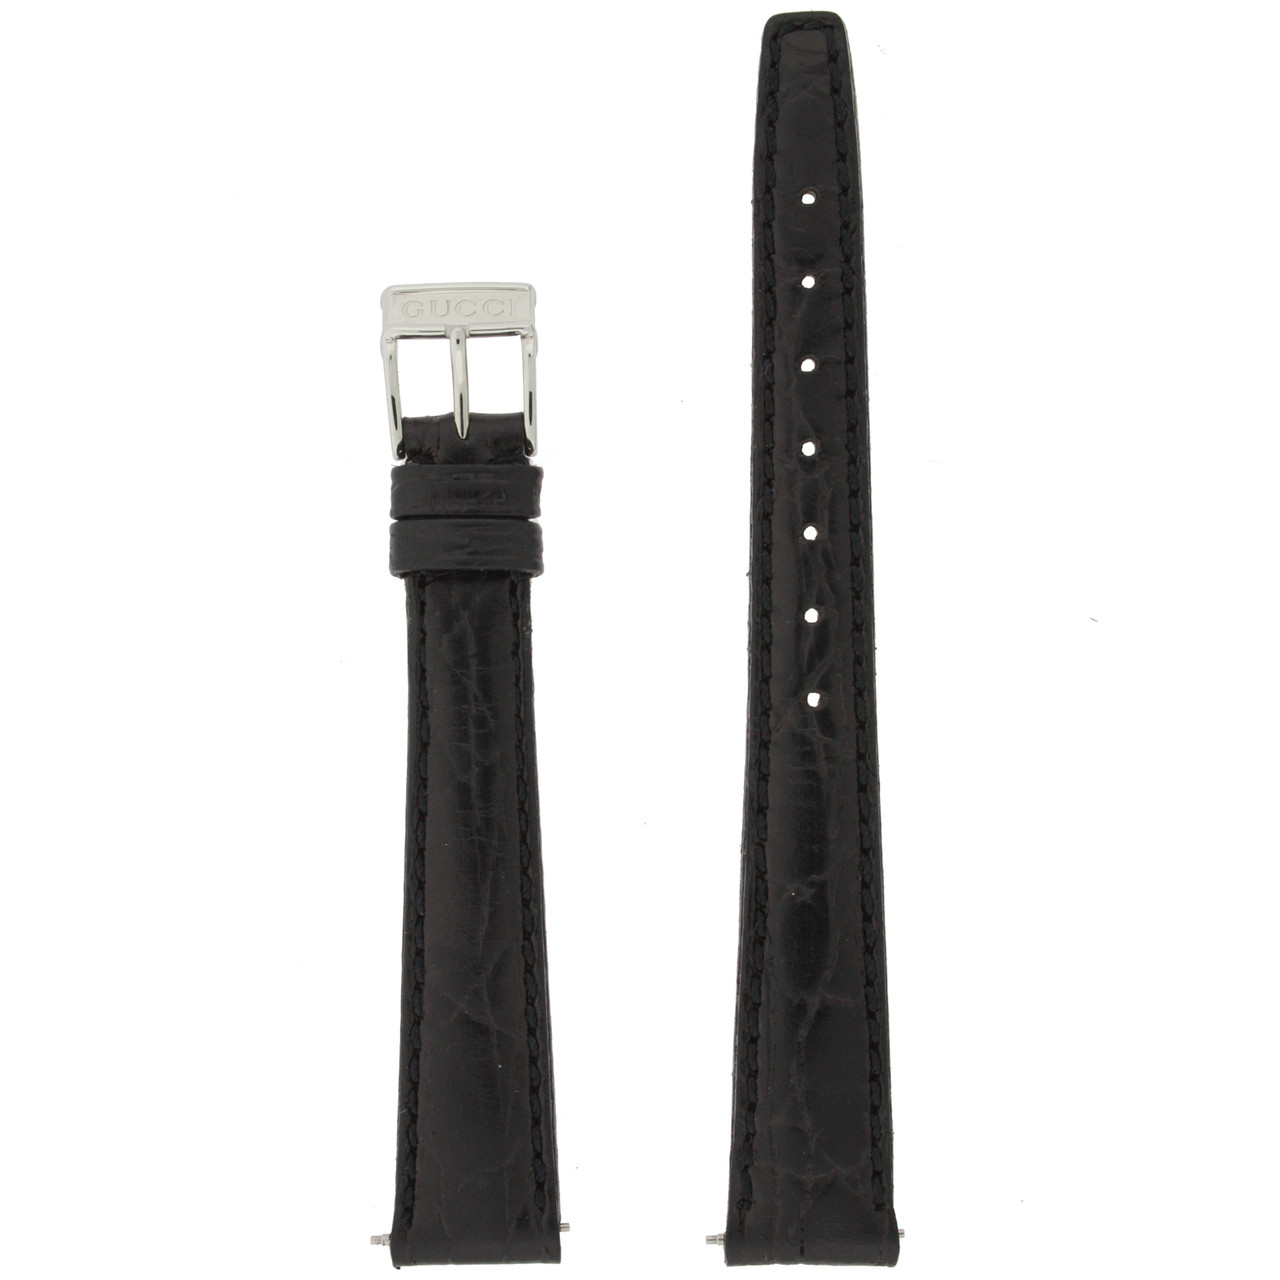 Genuine GUCCI Watch Band for Models 5500L 7400L 6300L 6500L 14mm Black Leather | Replacement Strap